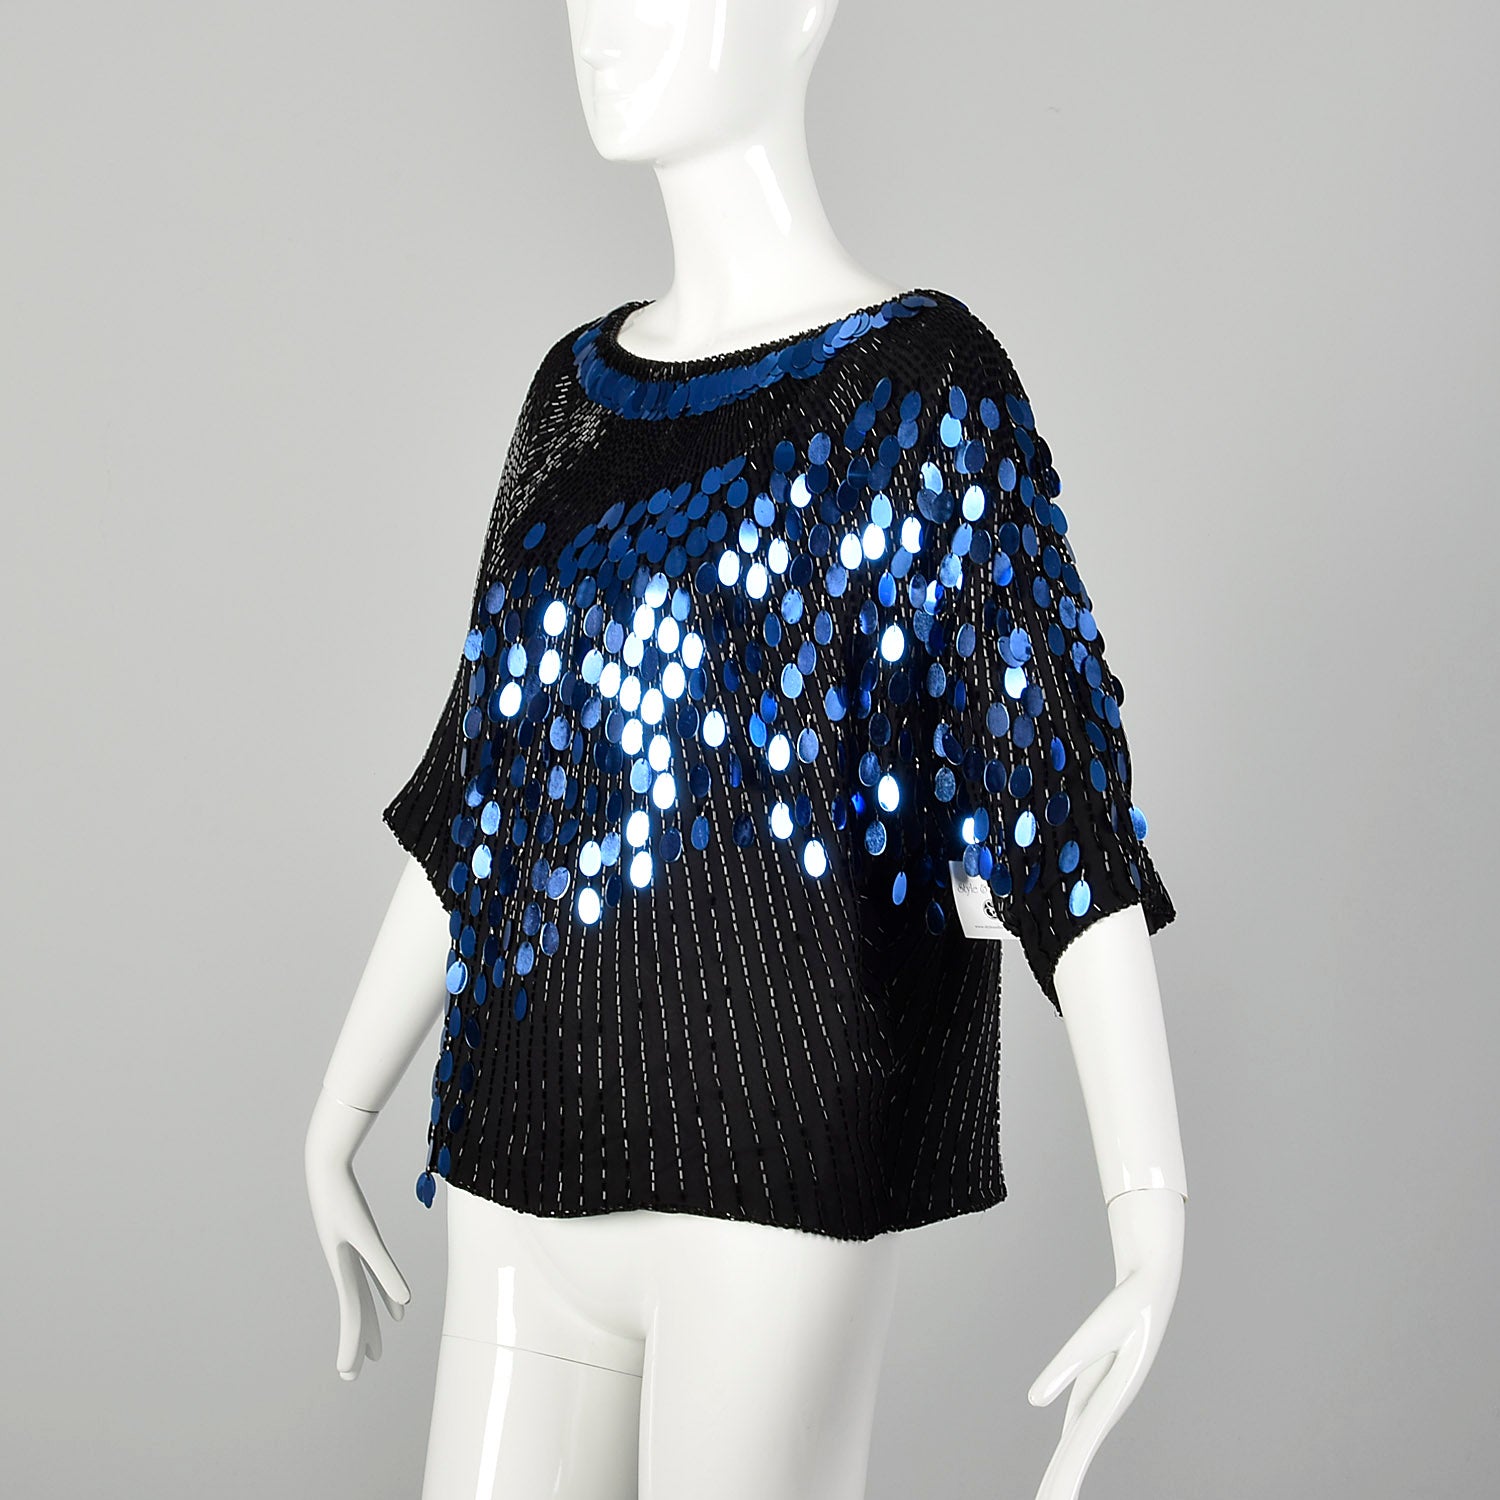 Medium 1980s Black and Blue Dolman Top Beaded Sequin Paillettes